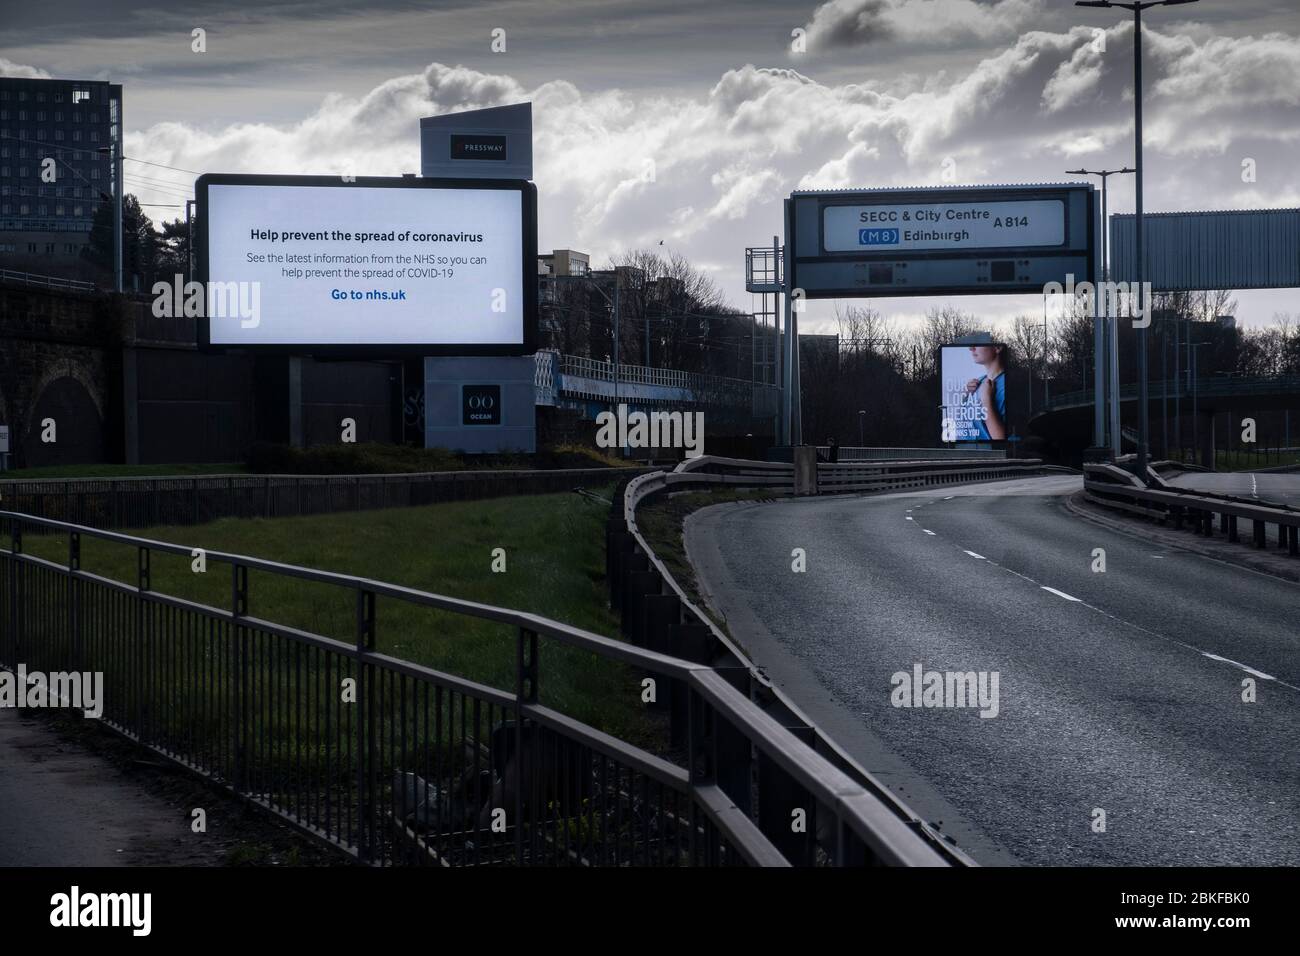 Information Billboards along Glasgow's expressway during the Covid-19 lockdown. Stock Photo